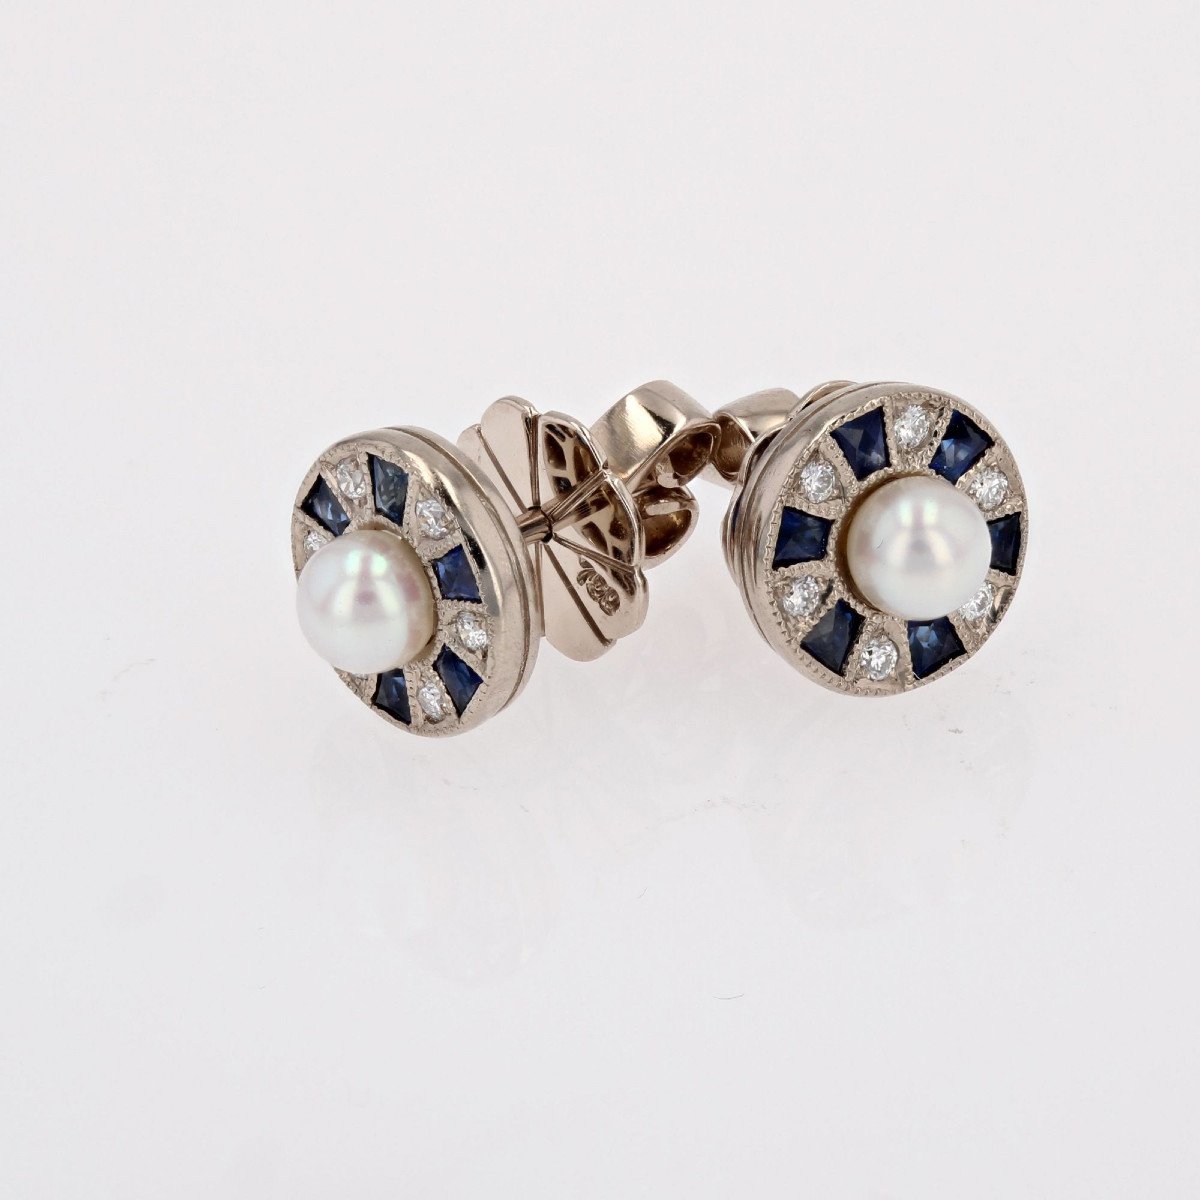 Calibrated Diamond And Sapphire Pearl Earrings-photo-4